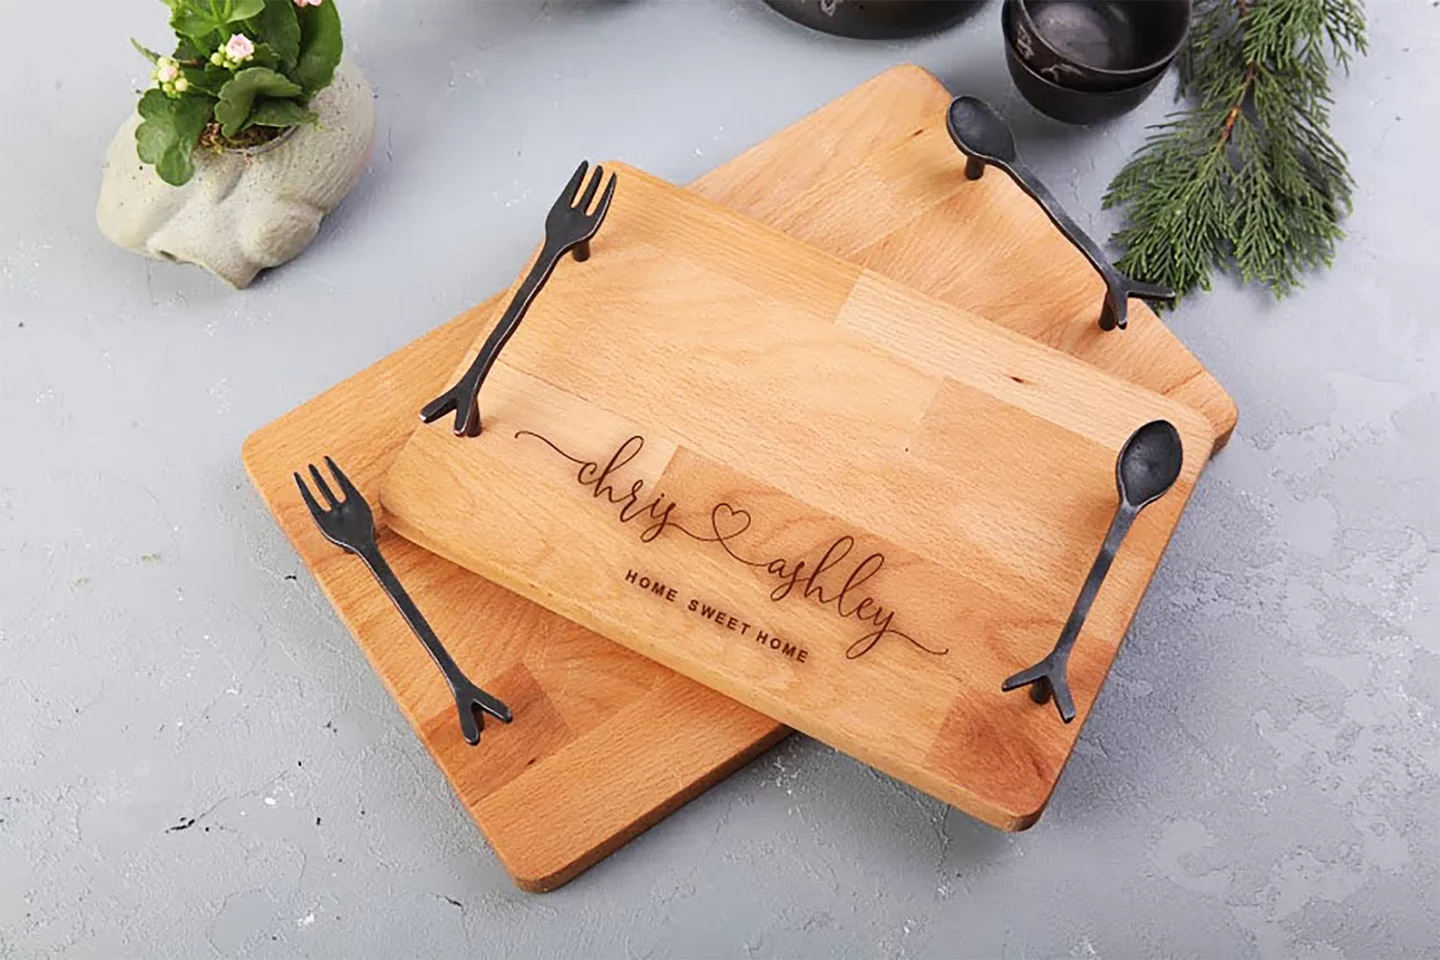 Charcuterie Board with Fork and Spoon Handles via MiklaGiftStore on Etsy